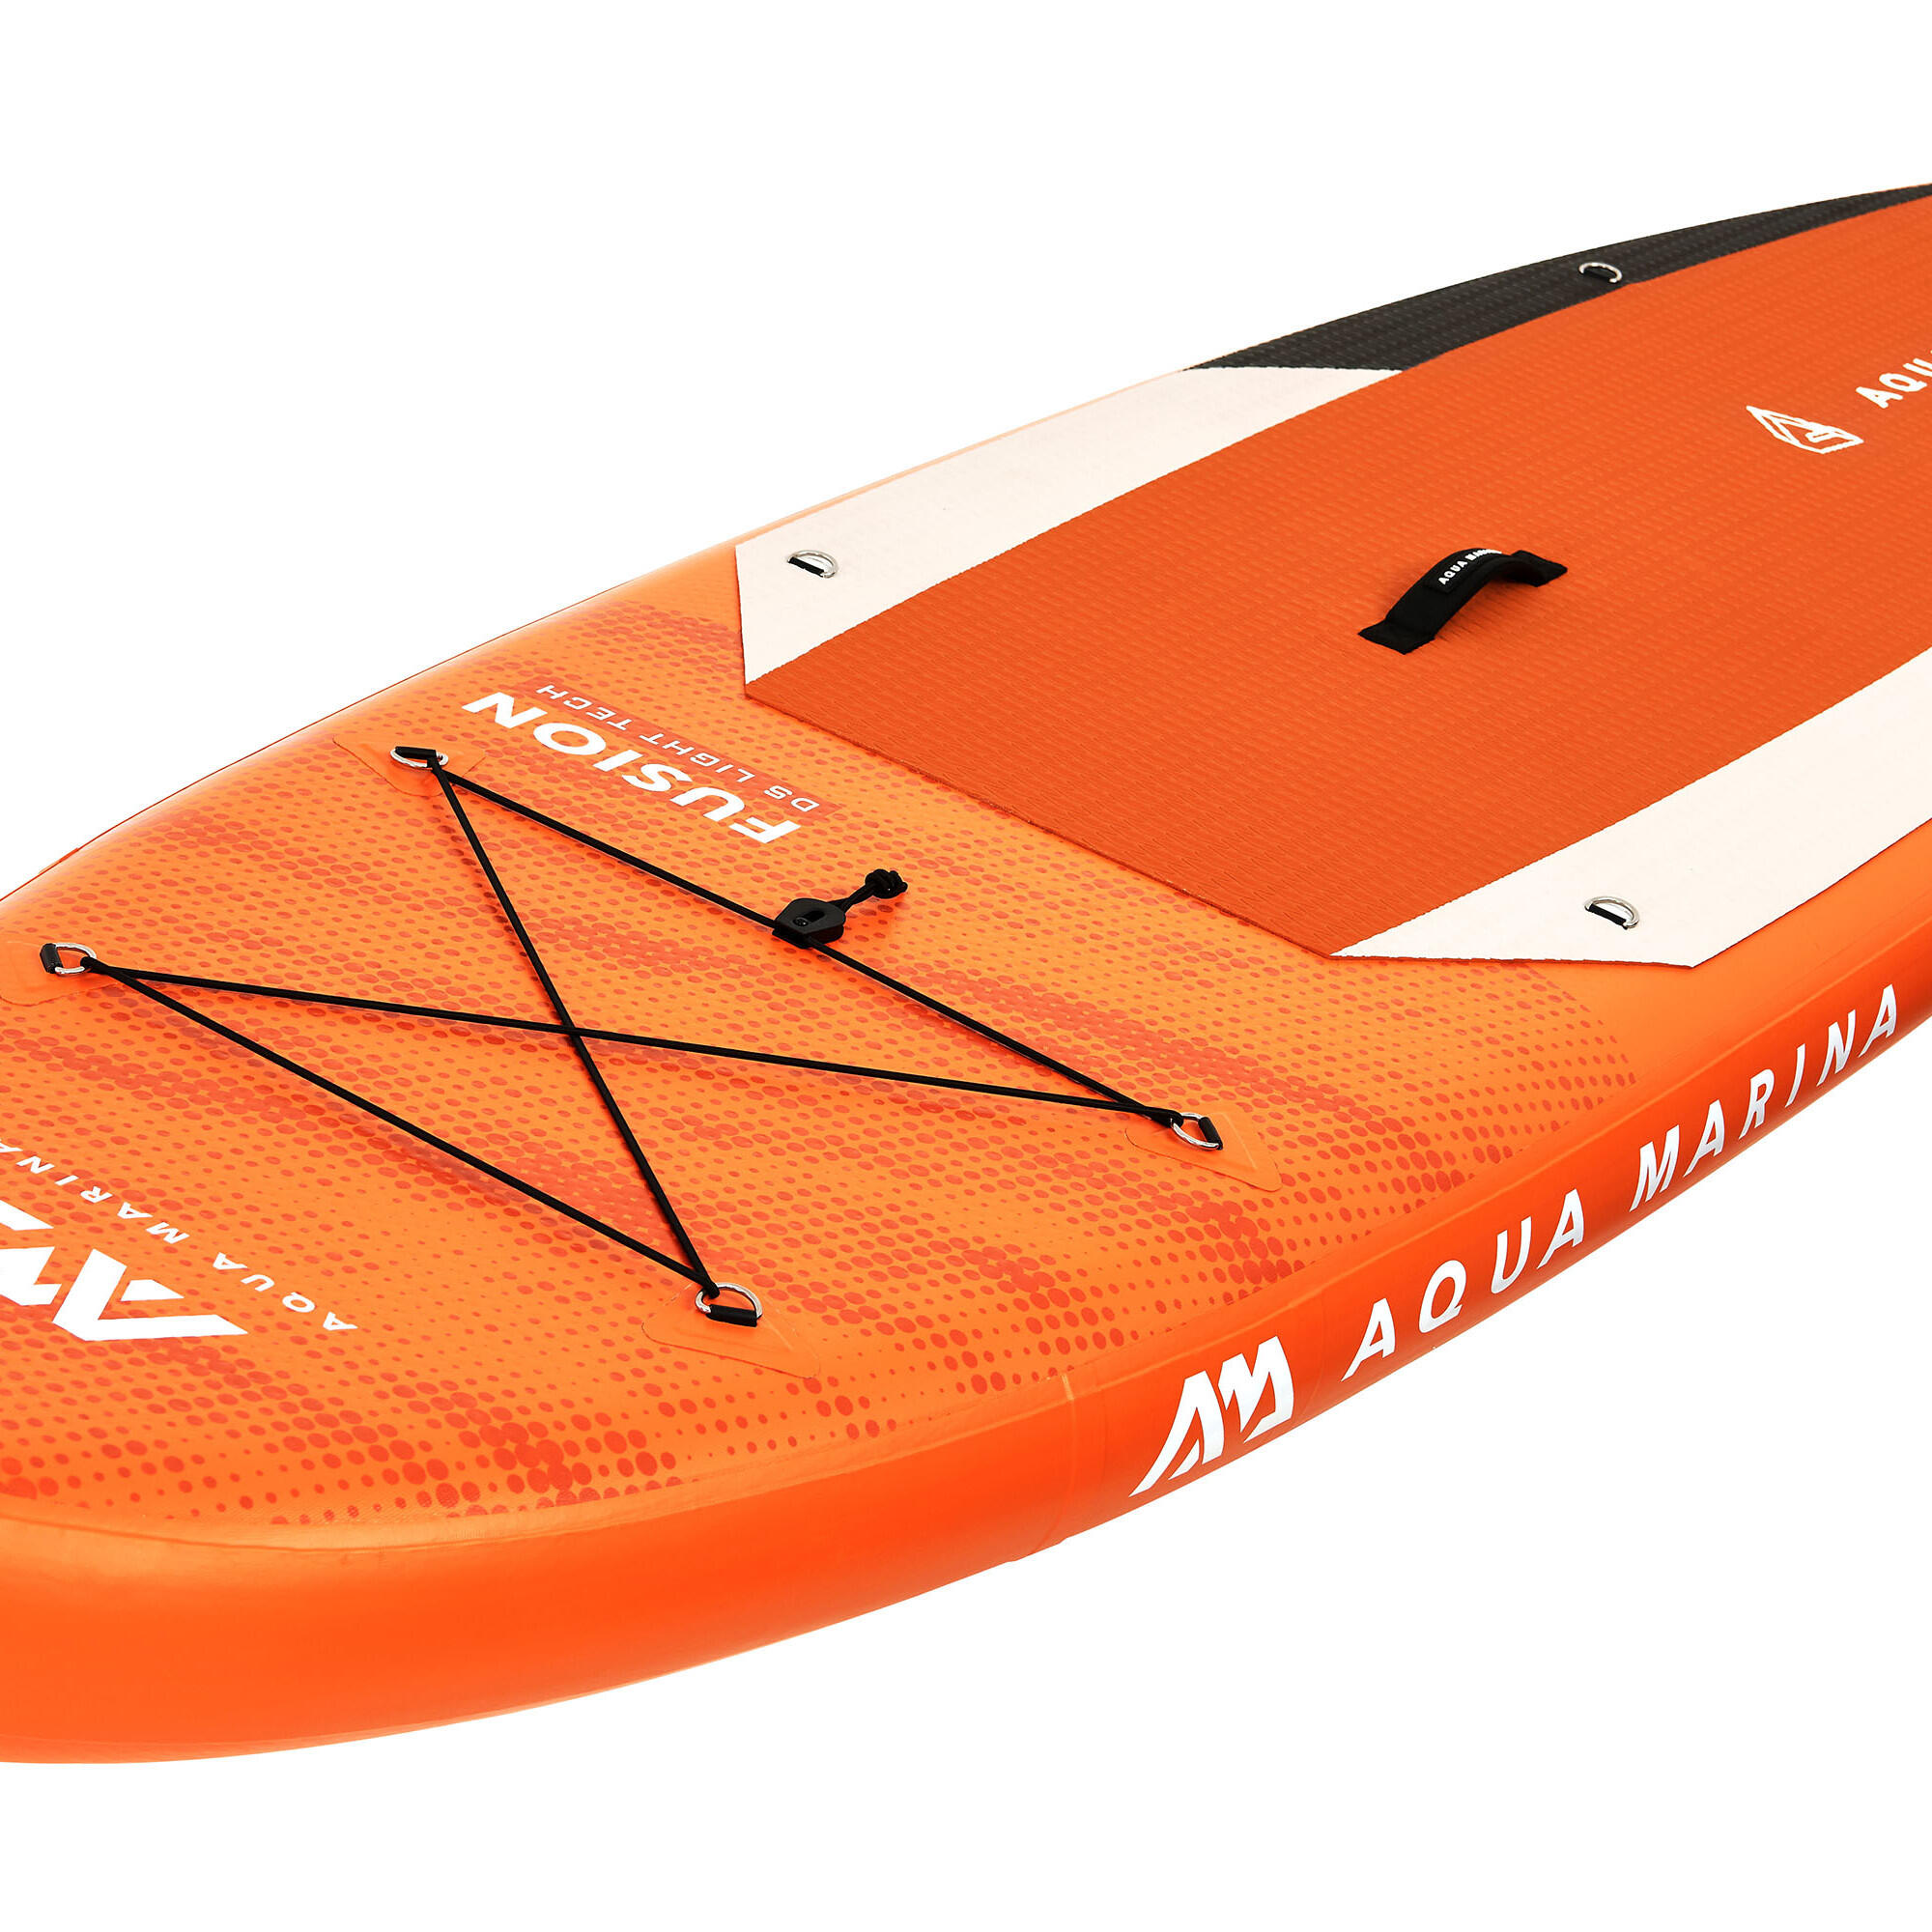 Aqua Marina Fusion stand-up paddle board package 10ft10/330cm 10/15